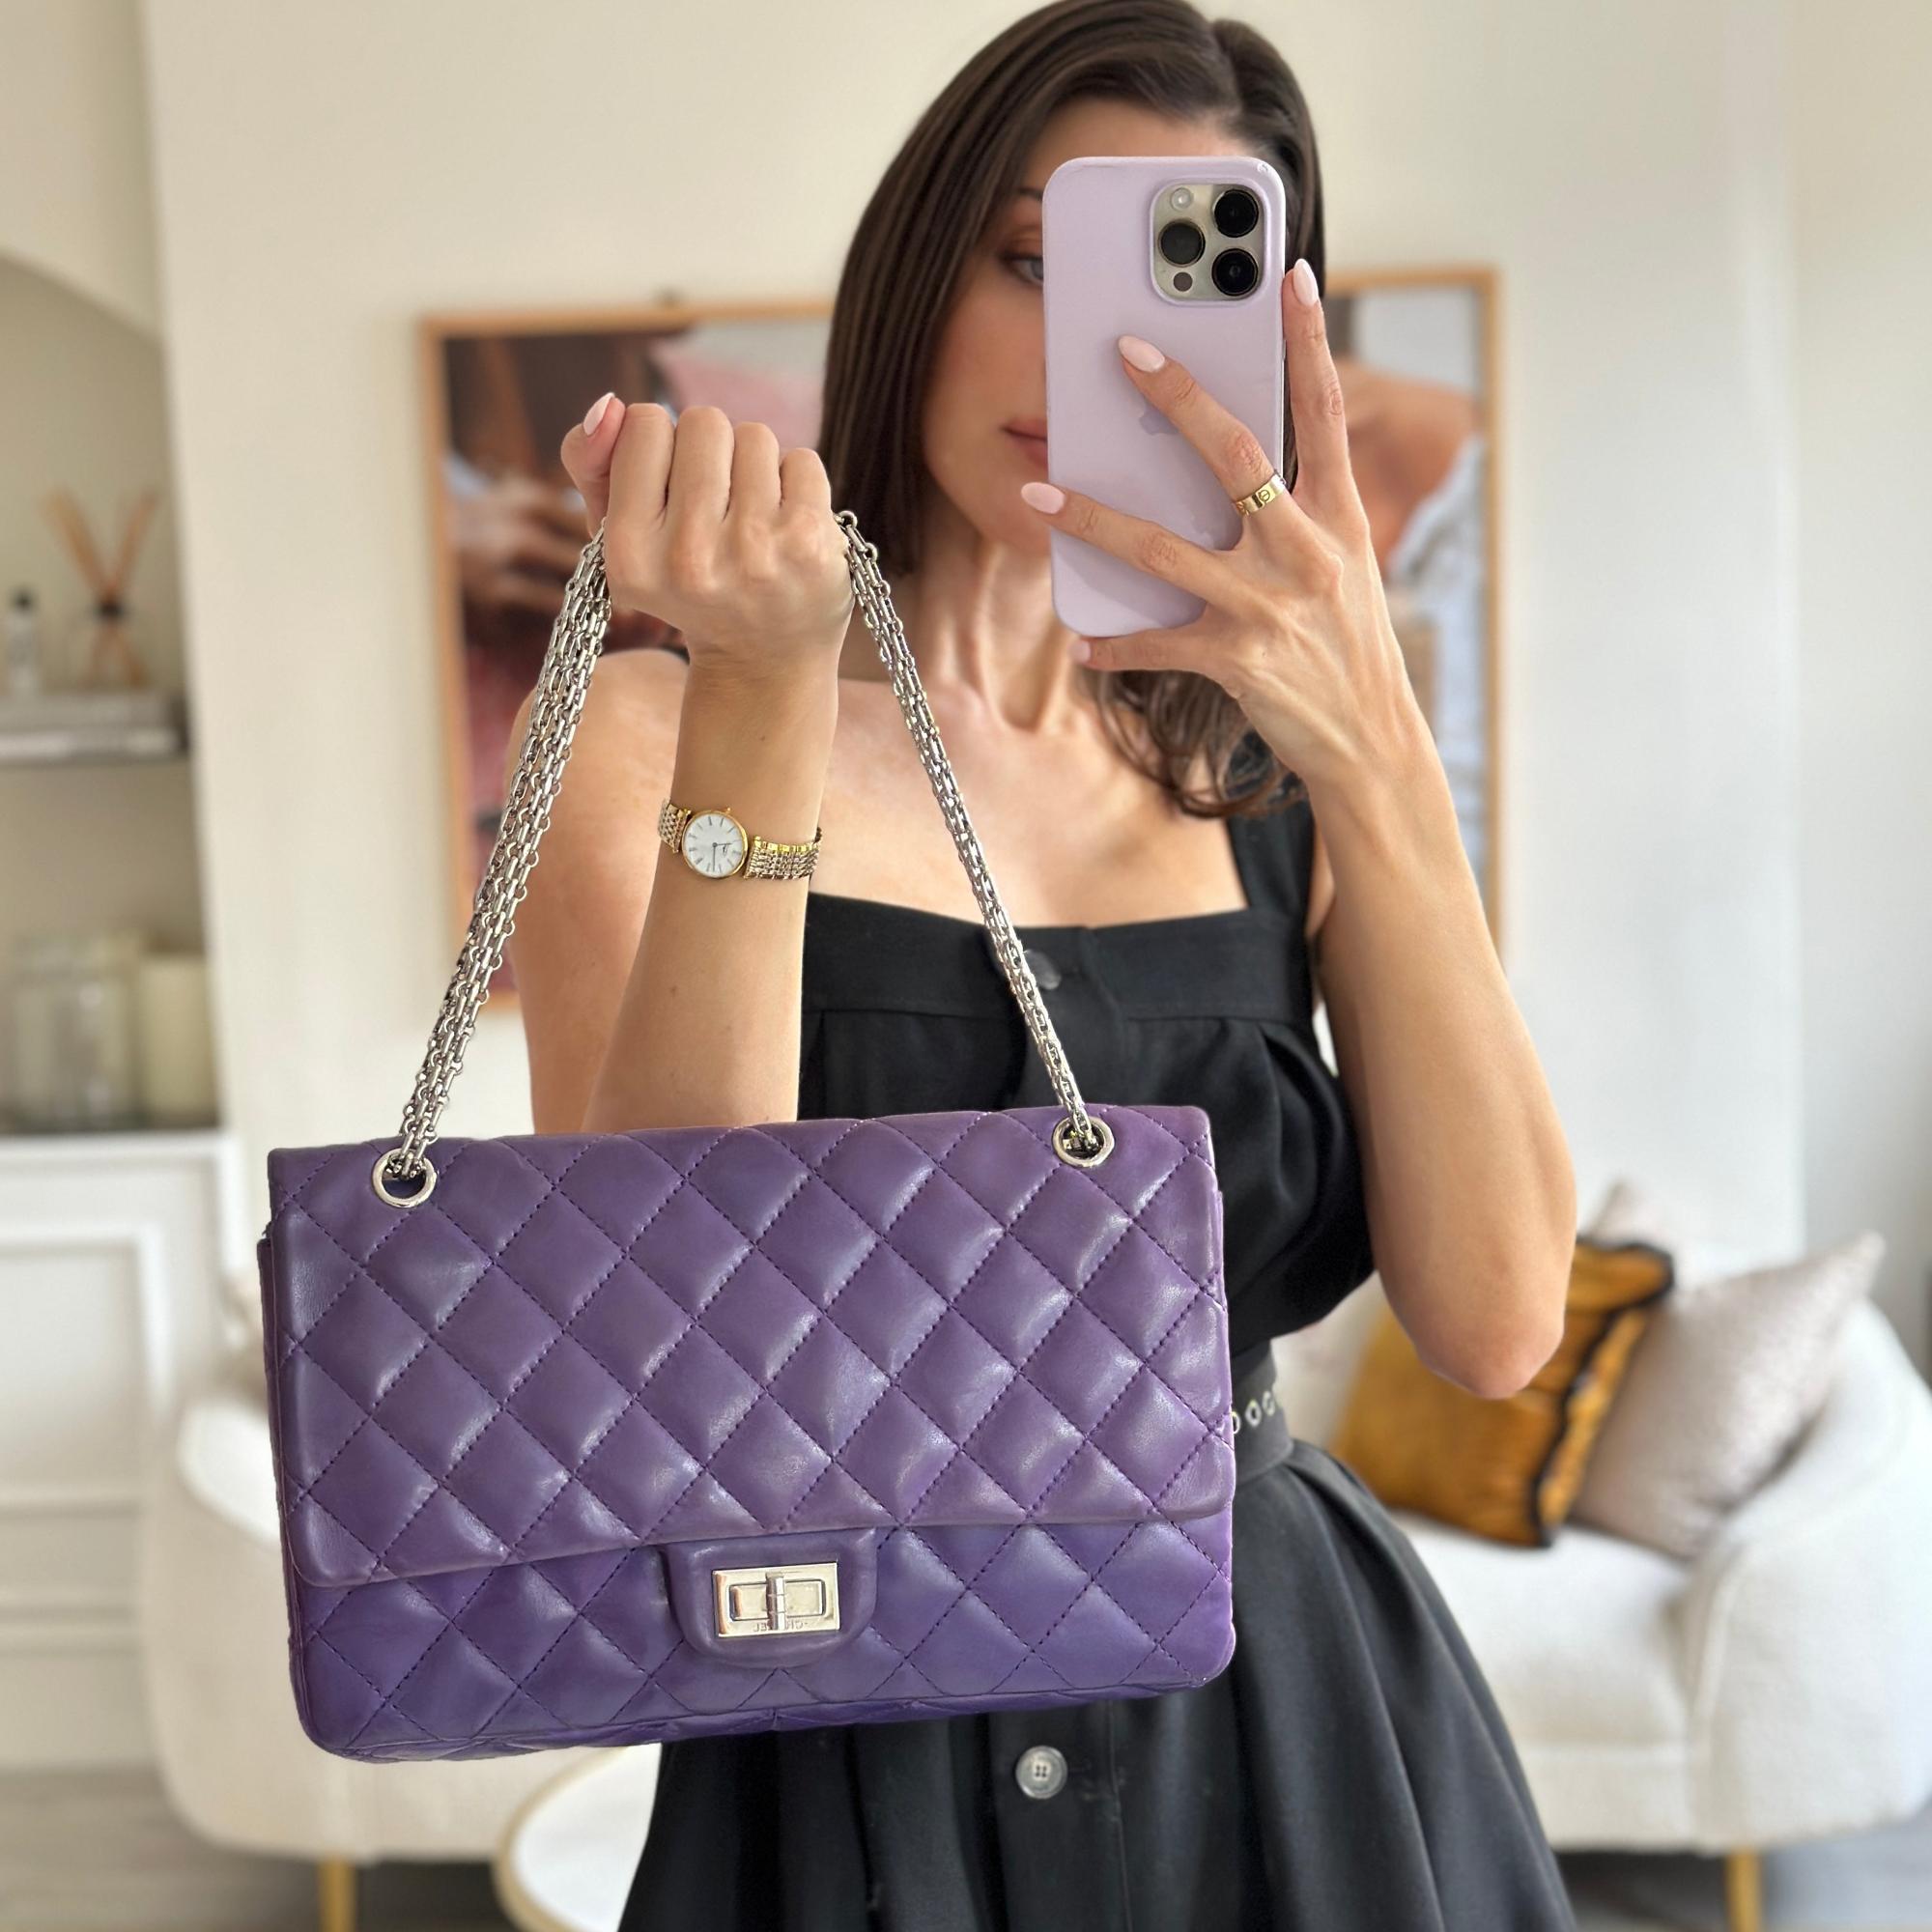 Chanel Purple Jumbo 2.55 Reissue Bag In Lambskin Leather With Silver Hardware